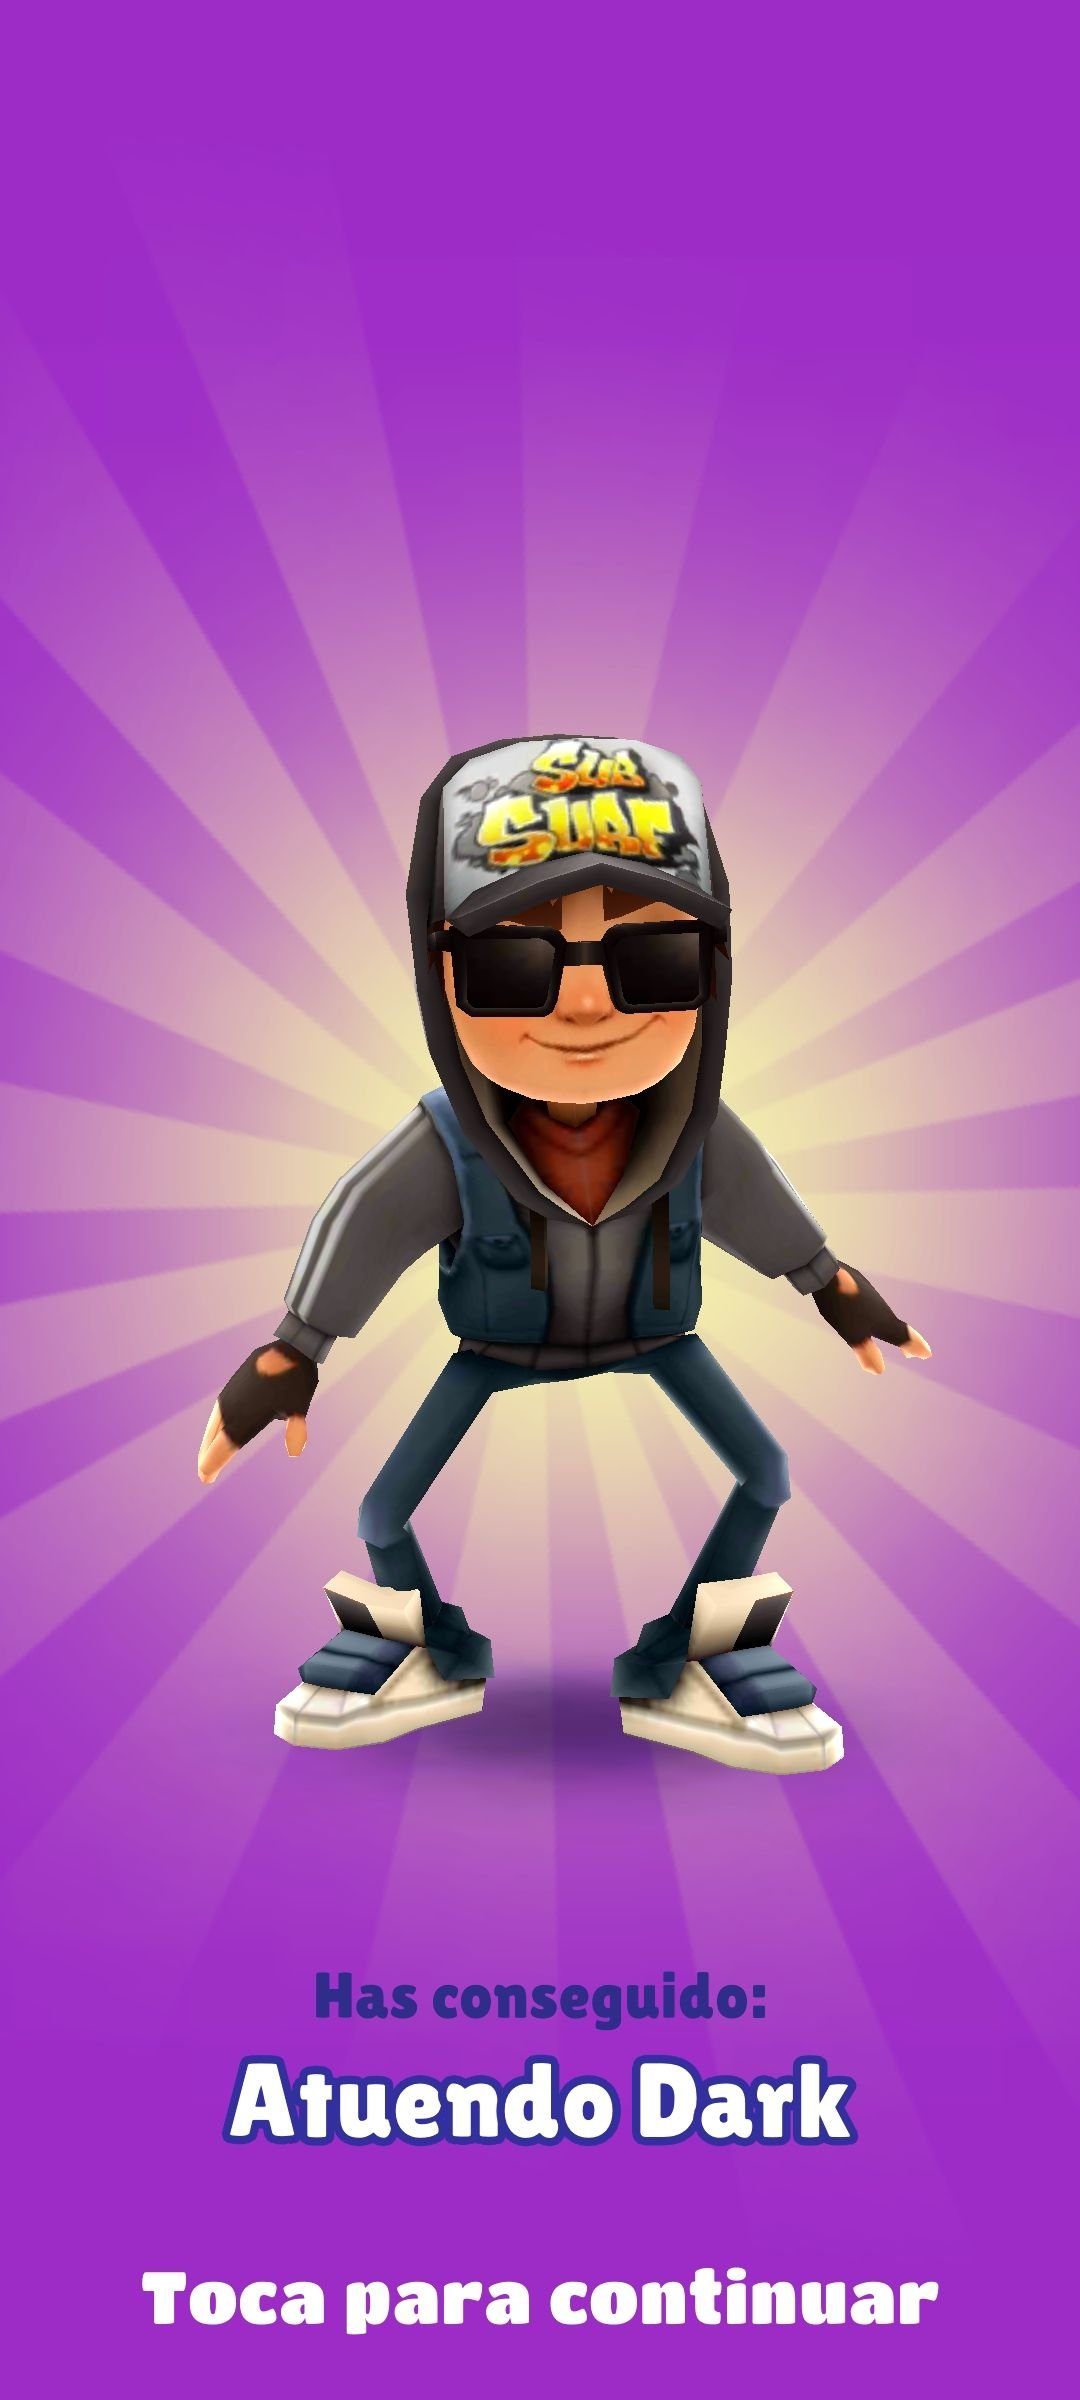 Subway Surfers (2022) review: Ten years later, is it still good?